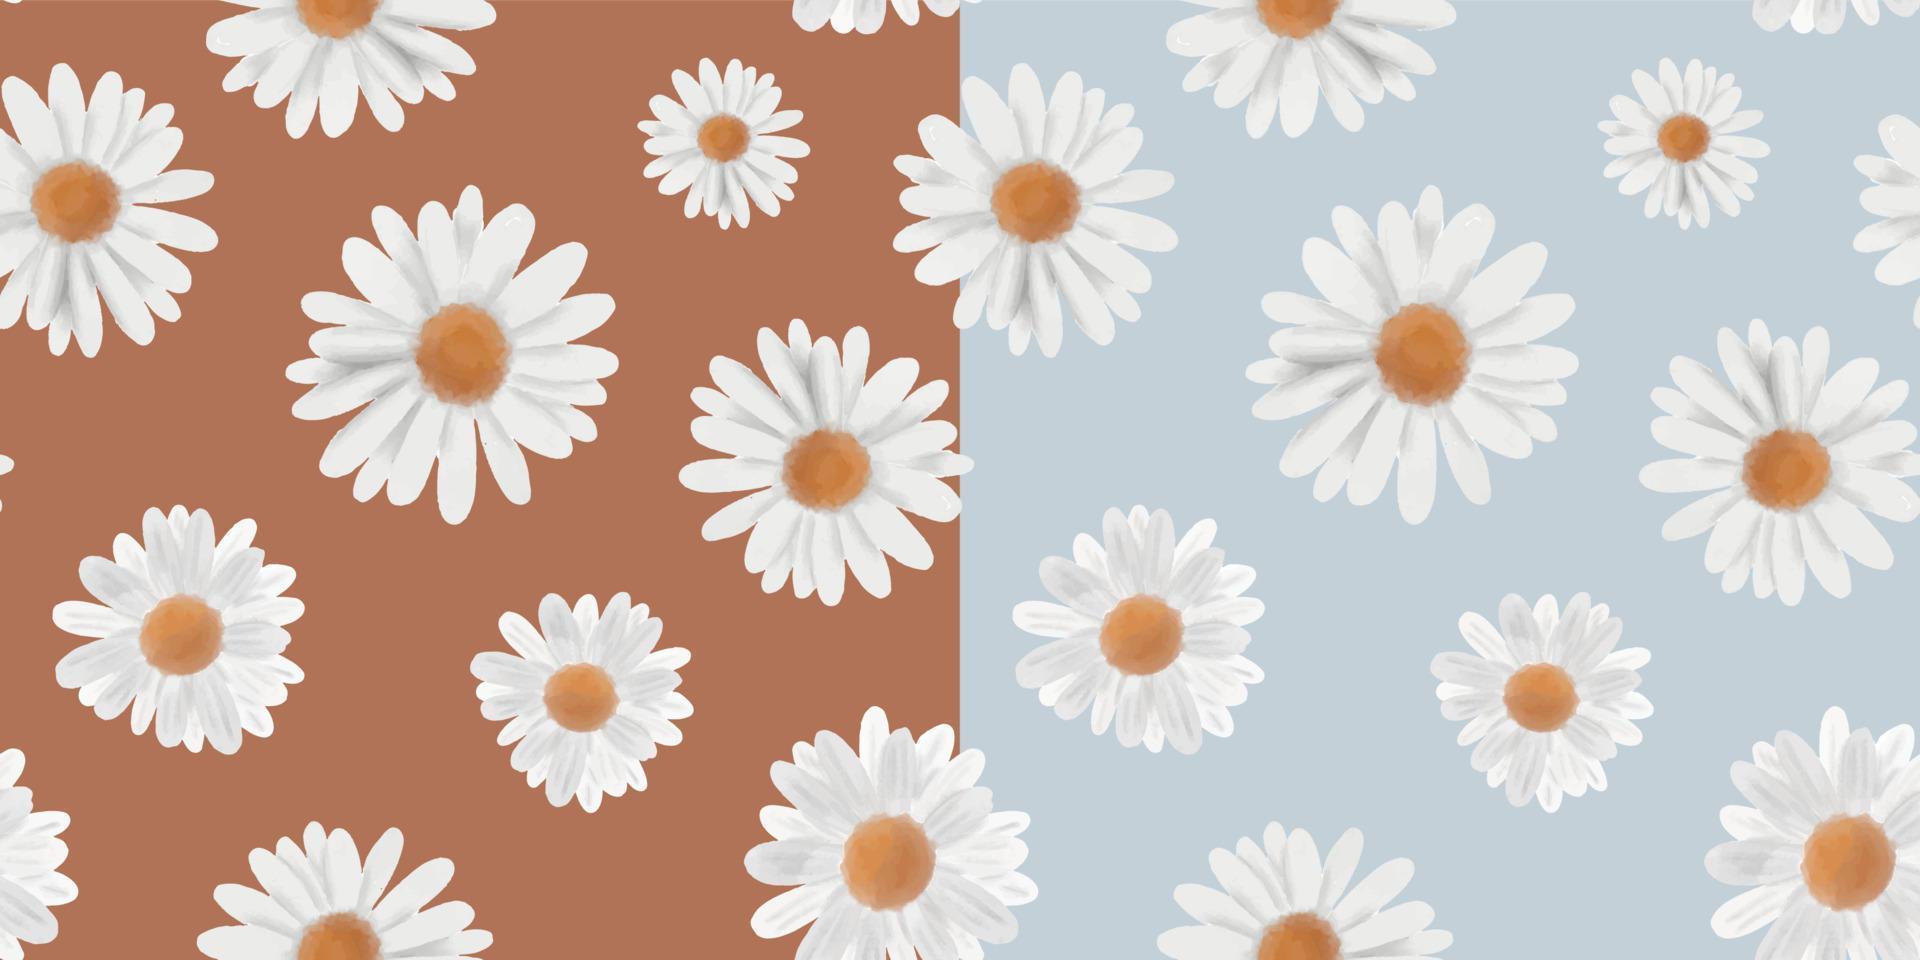 Floral Seamless Pattern with Chamomile Flowers. Natural Background with Daisy Flowers for Spring Summer Design Wallpaper, Decoration, Print. vector